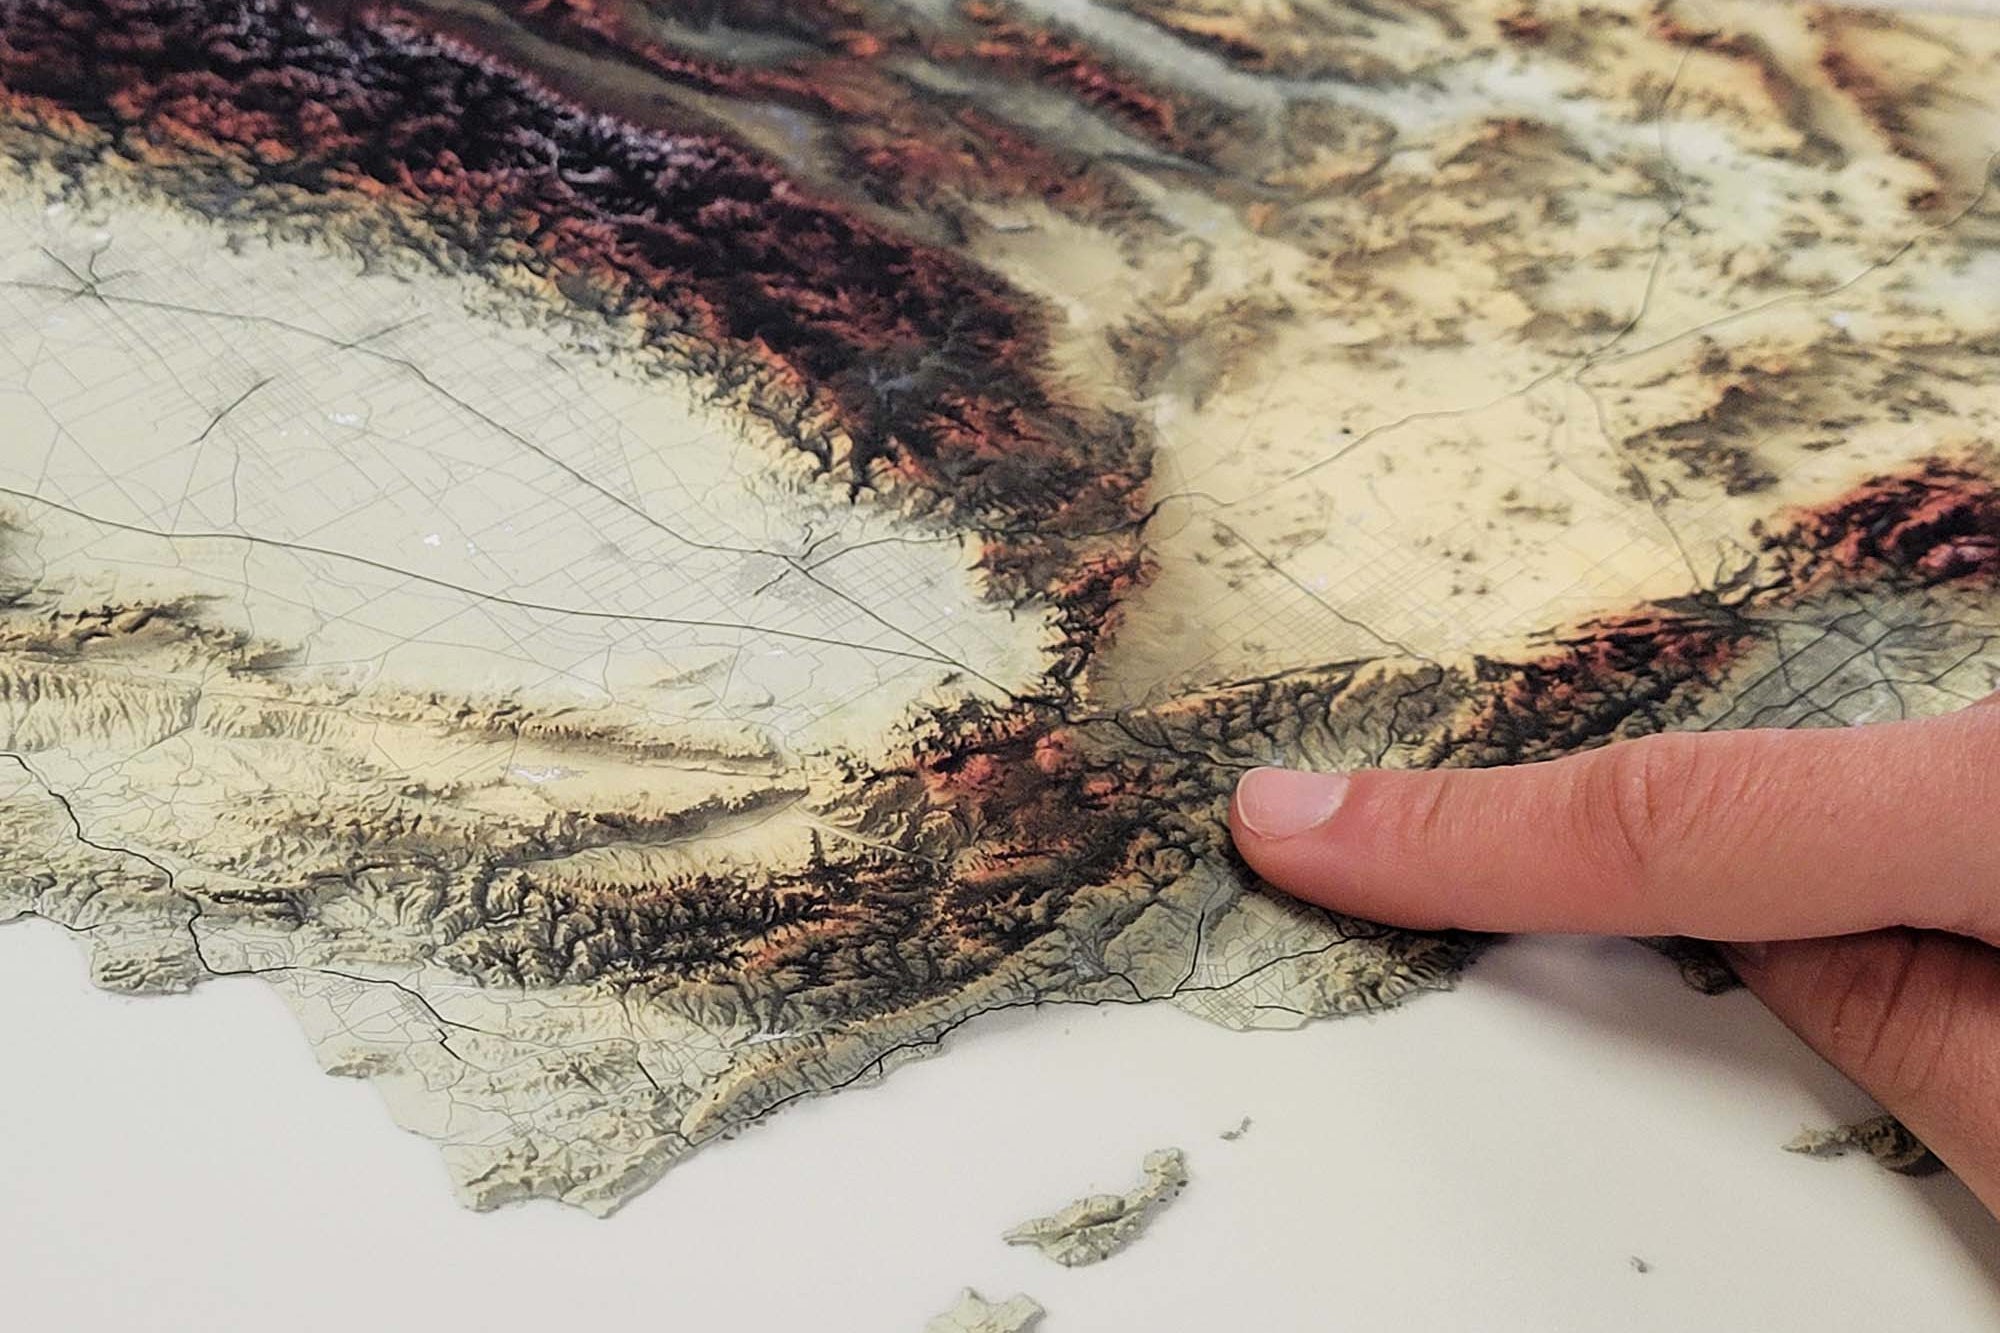 Los Angeles Mountain Ranges details on the california relief map